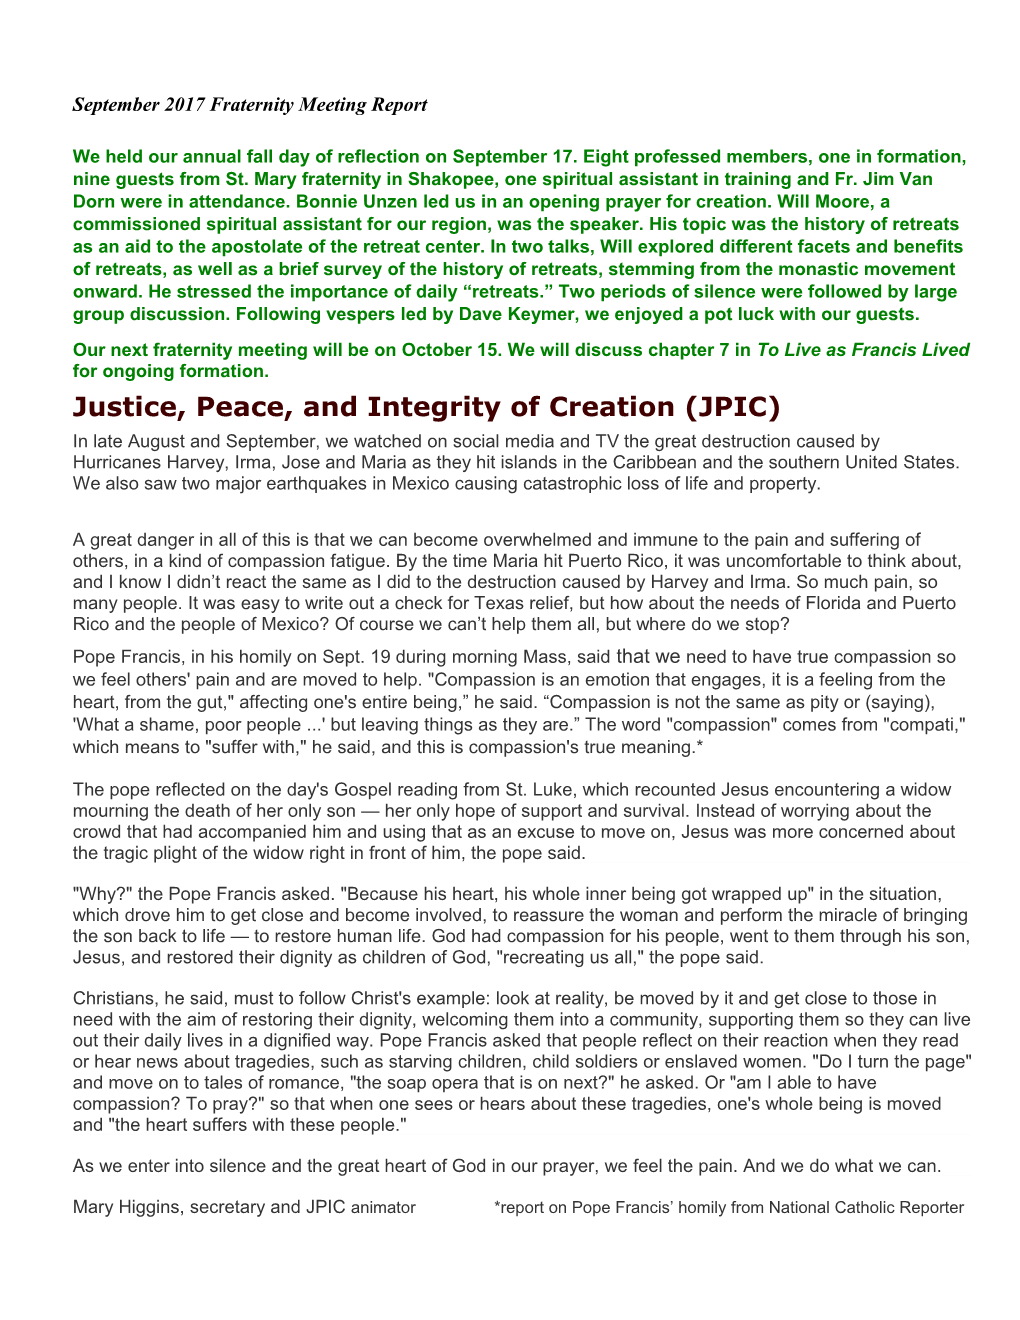 Justice, Peace, and Integrity of Creation (JPIC)